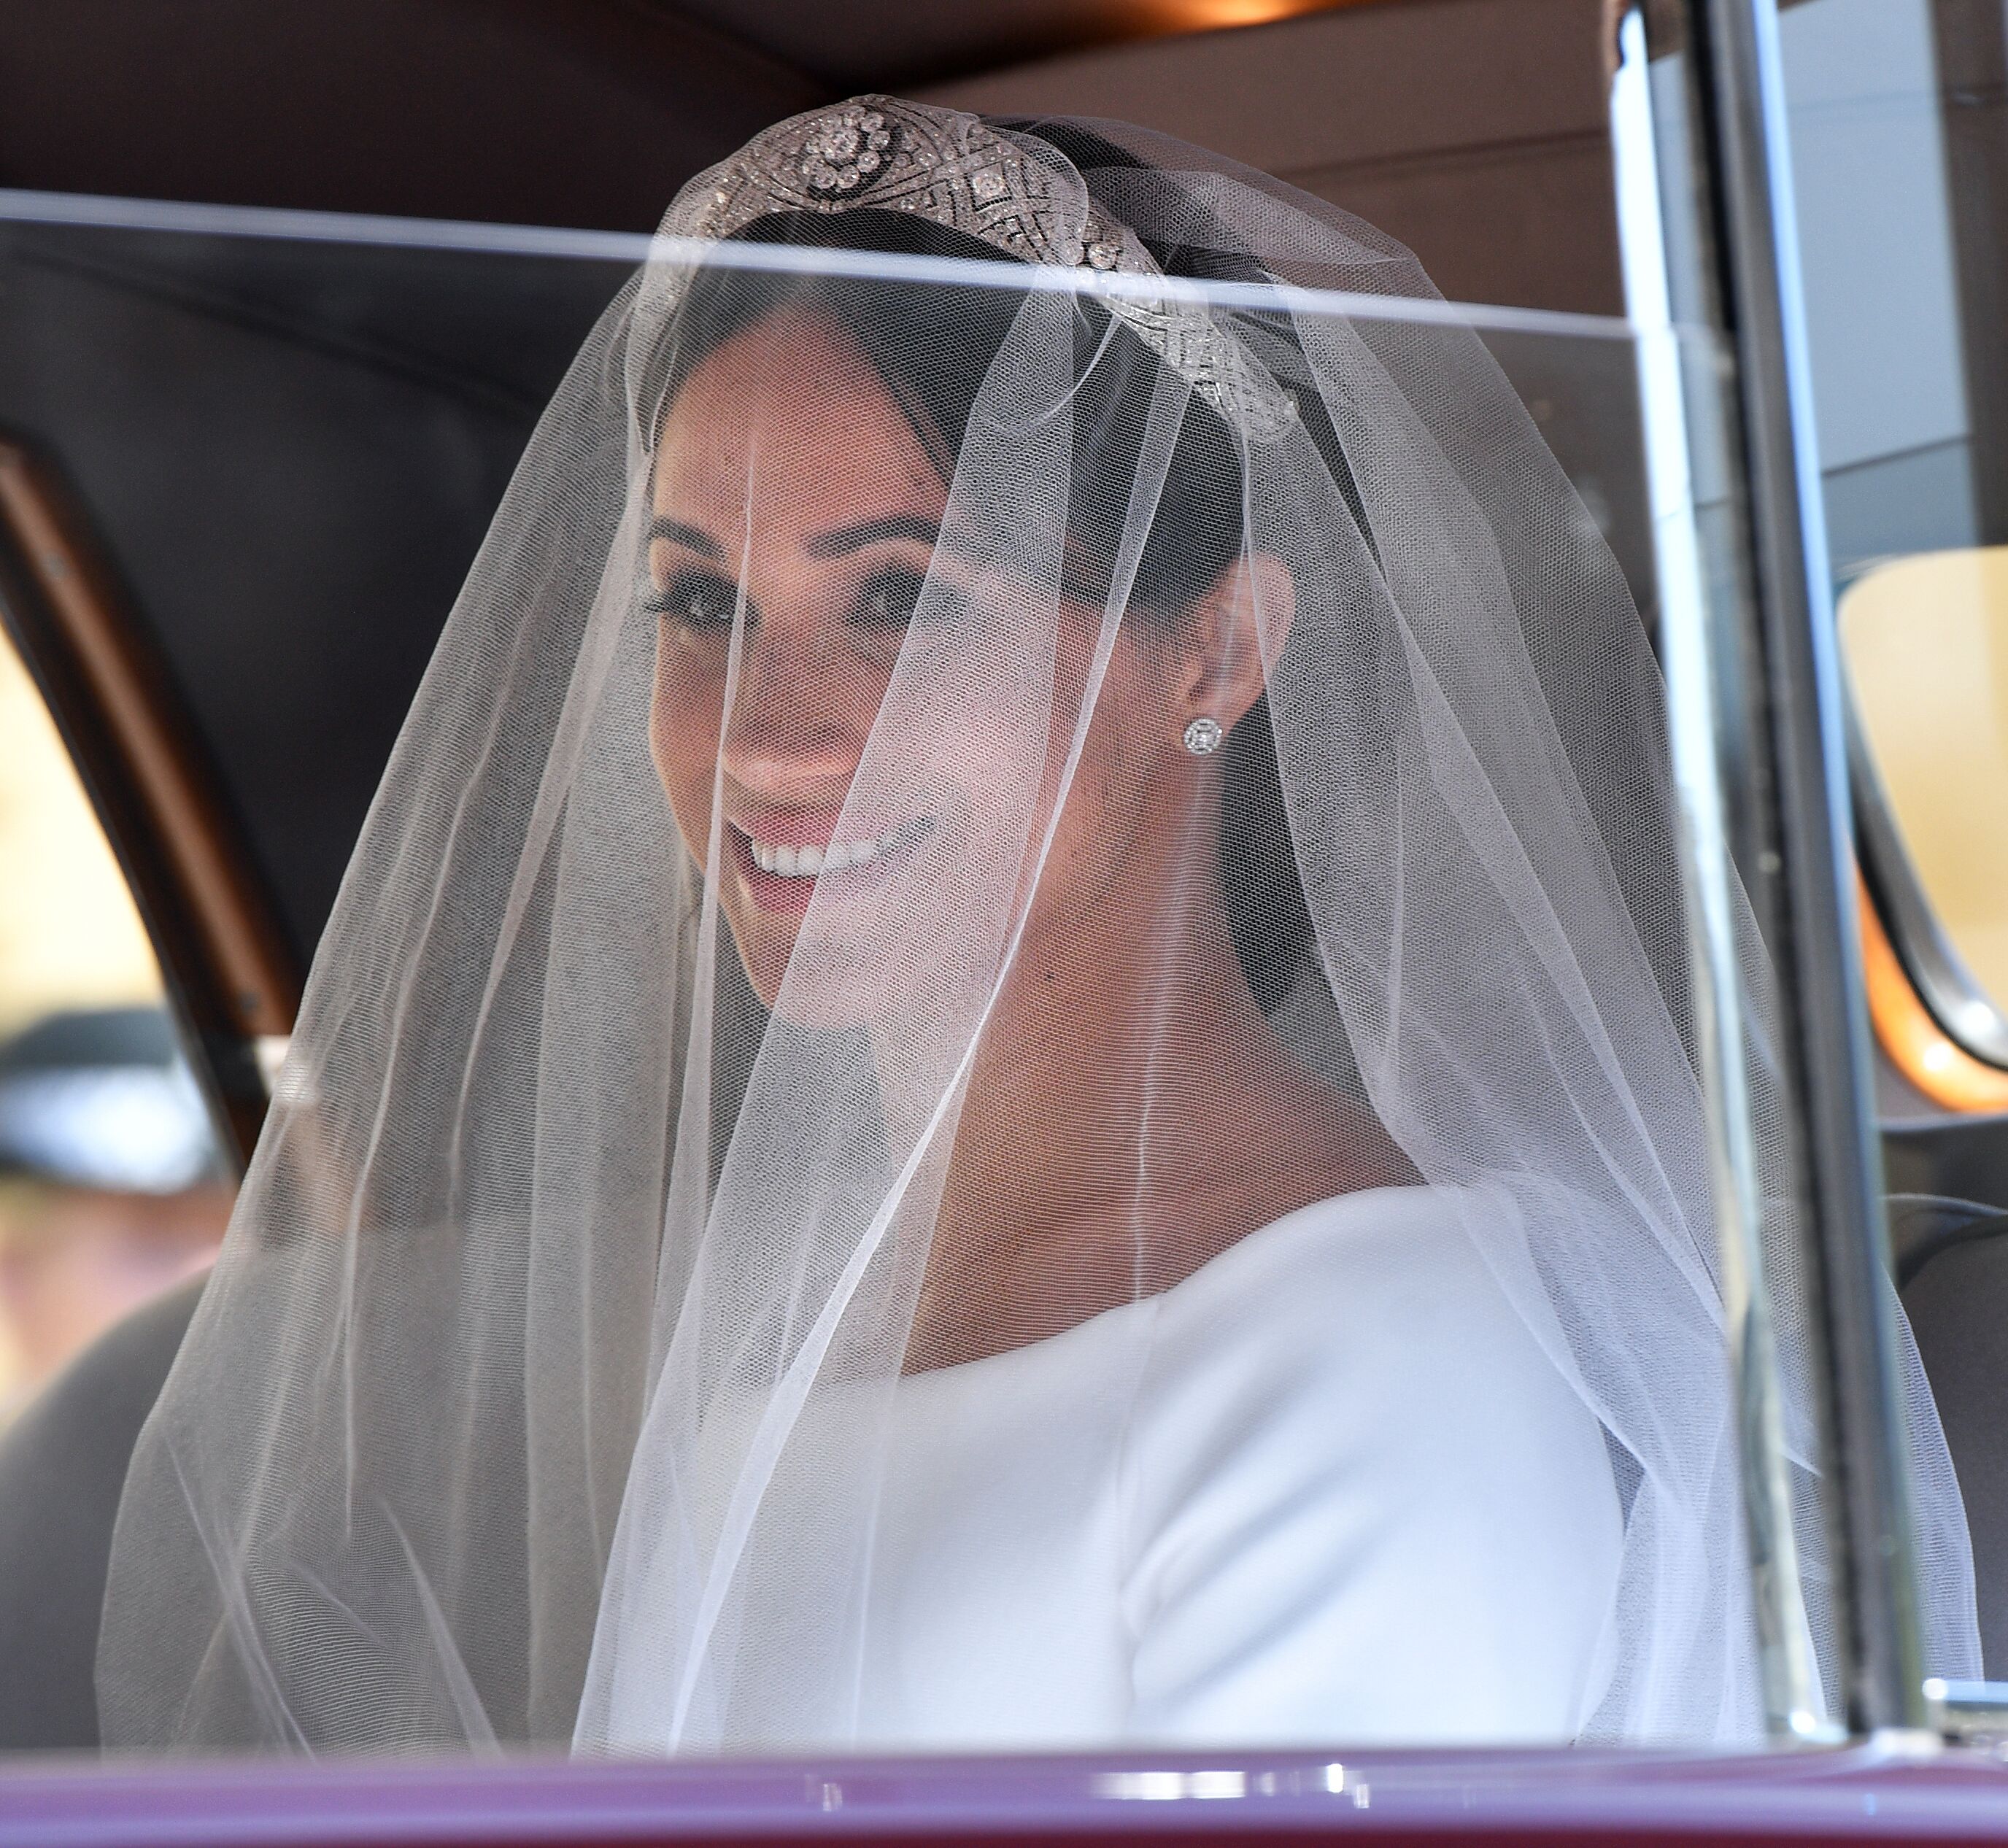 Meghan Markle arrives at St George's Chapel, Windsor Castle for her wedding to Prince Harry. | Source: Getty Images